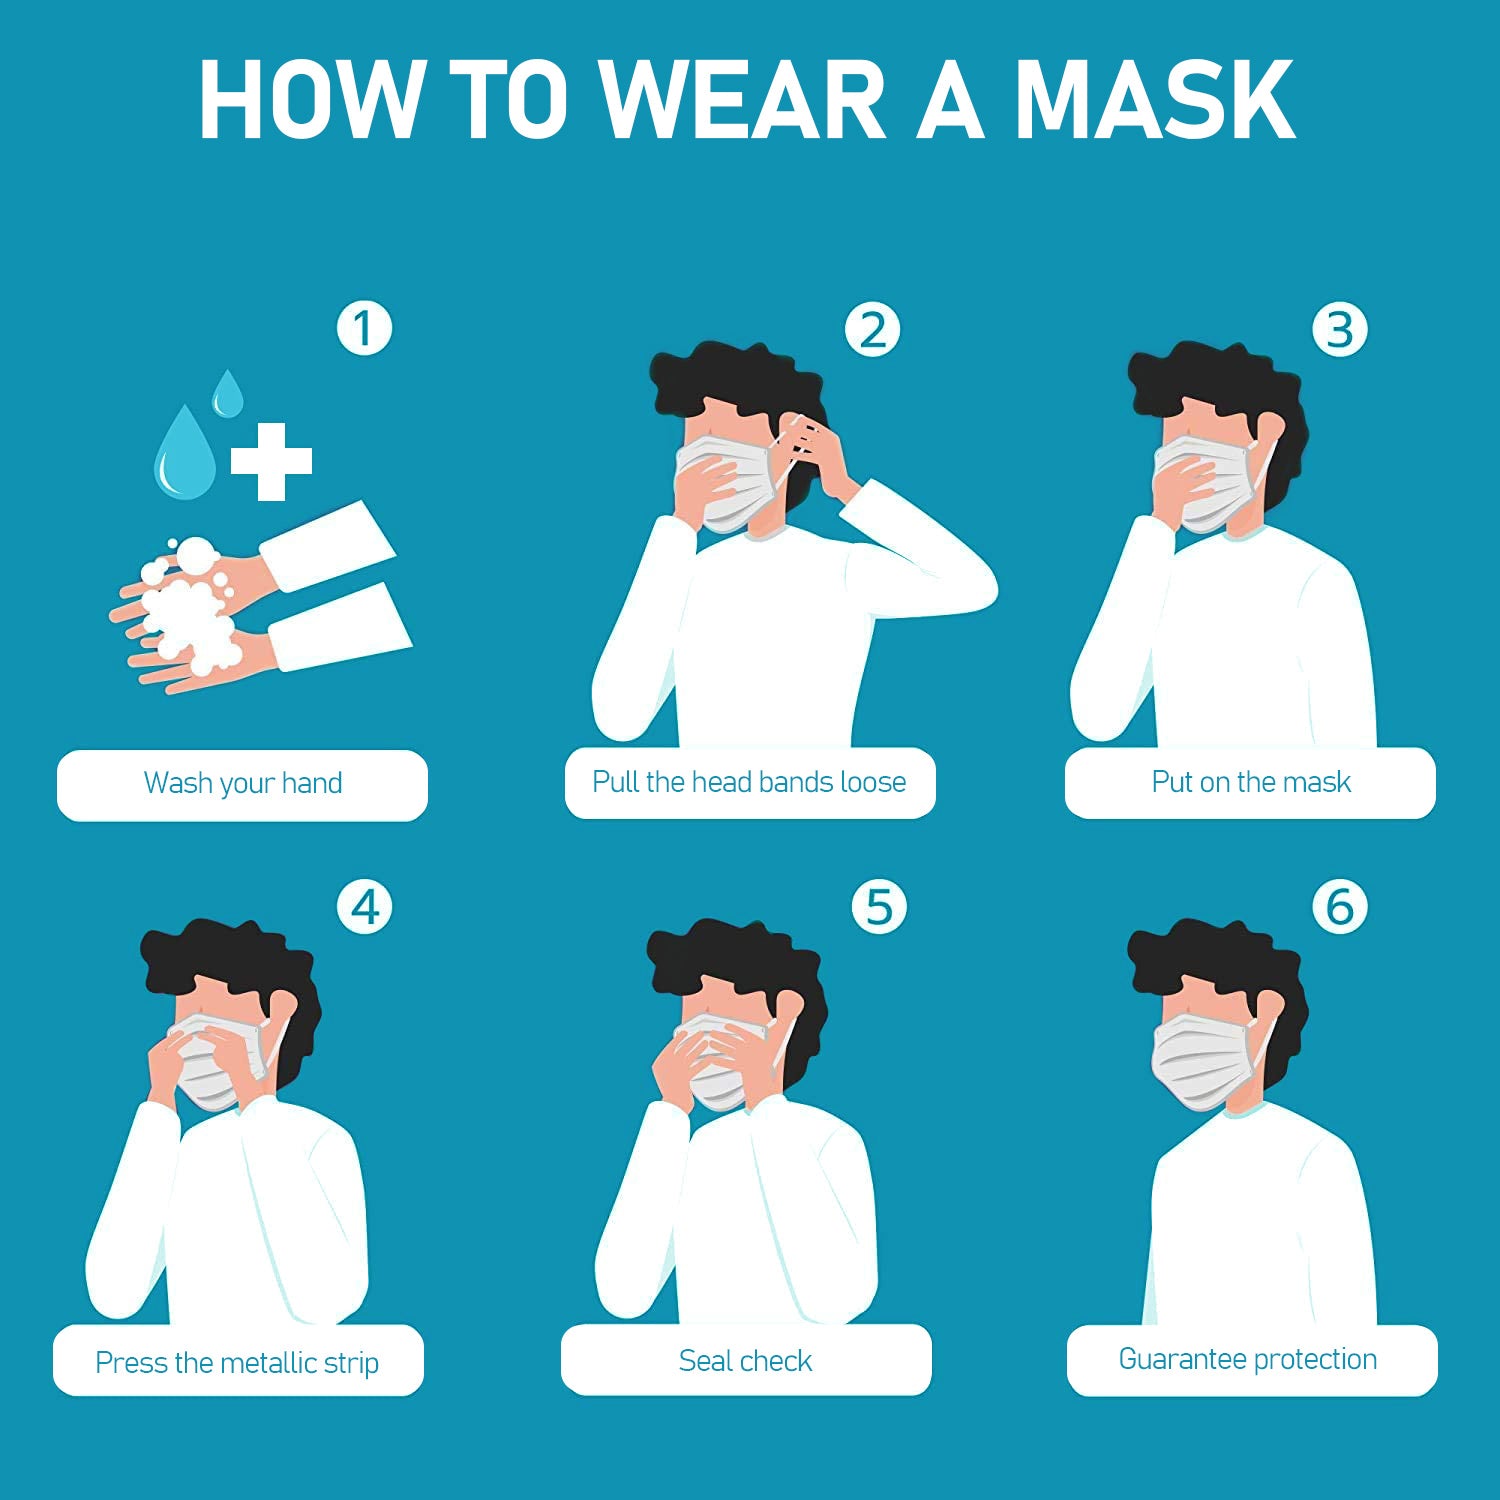 Disposable Face Mask for Family (100 PCS)